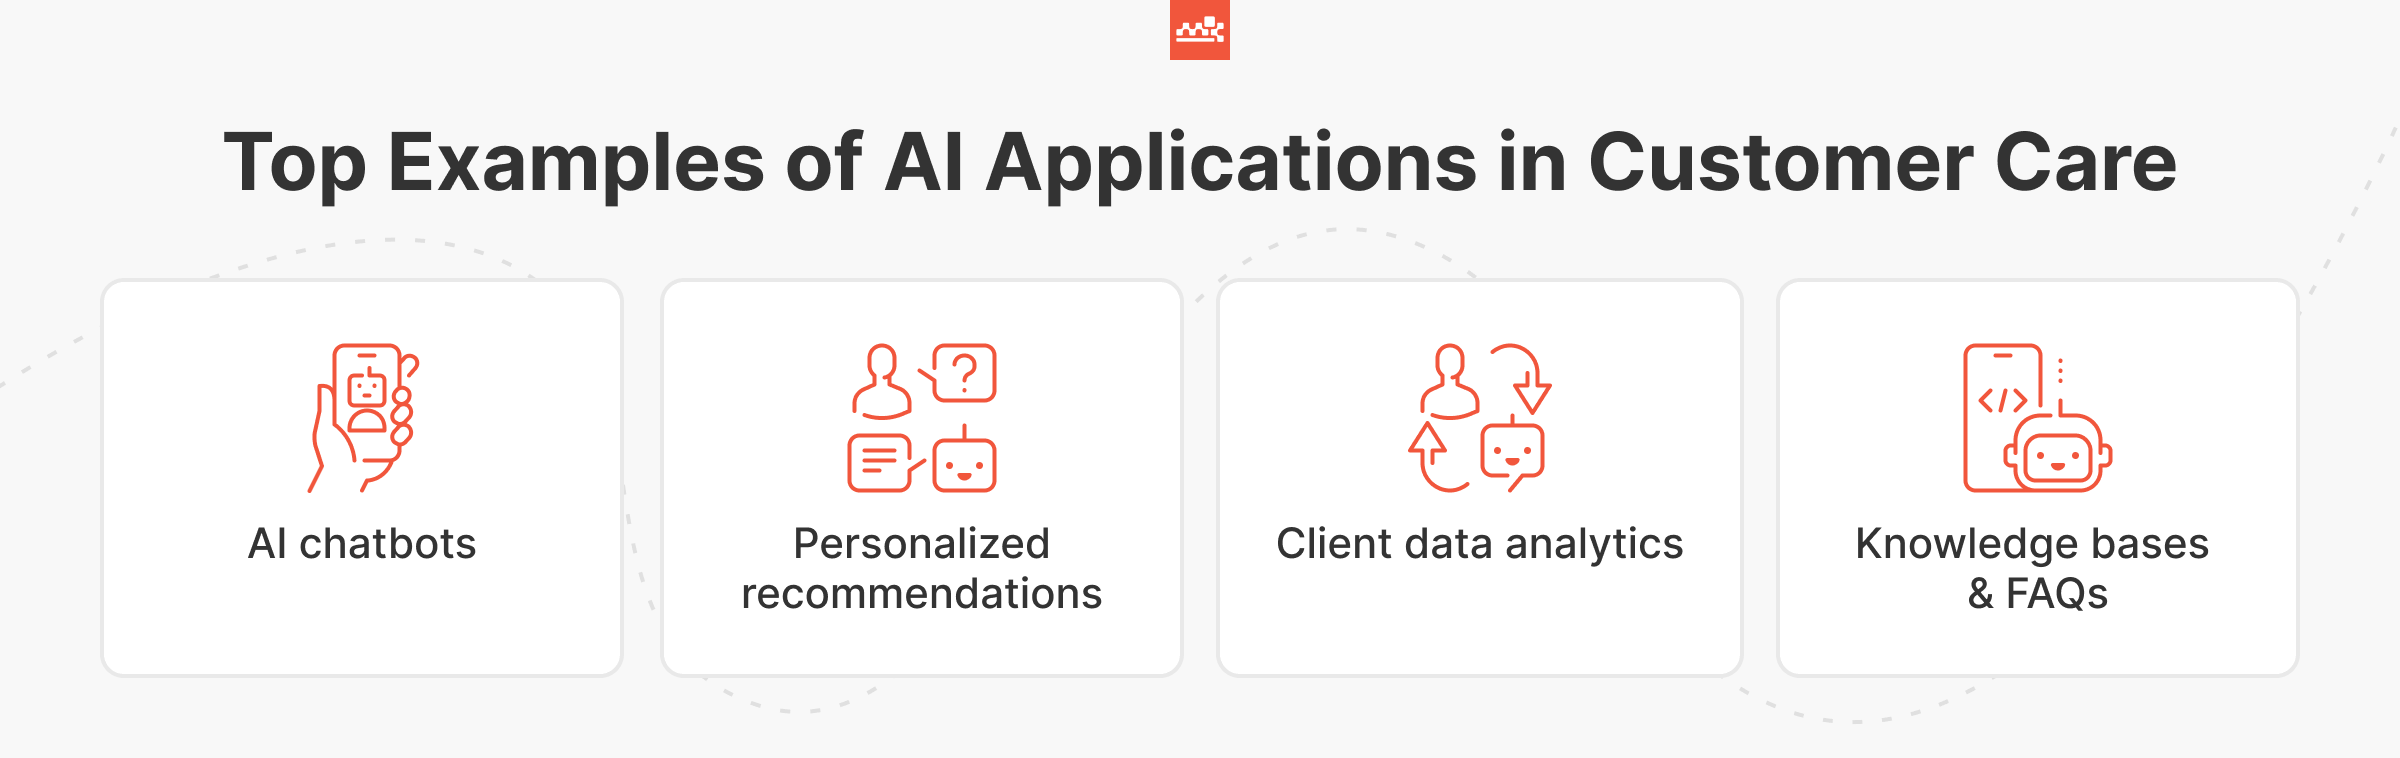 Examples of AI Applications in Customer Care